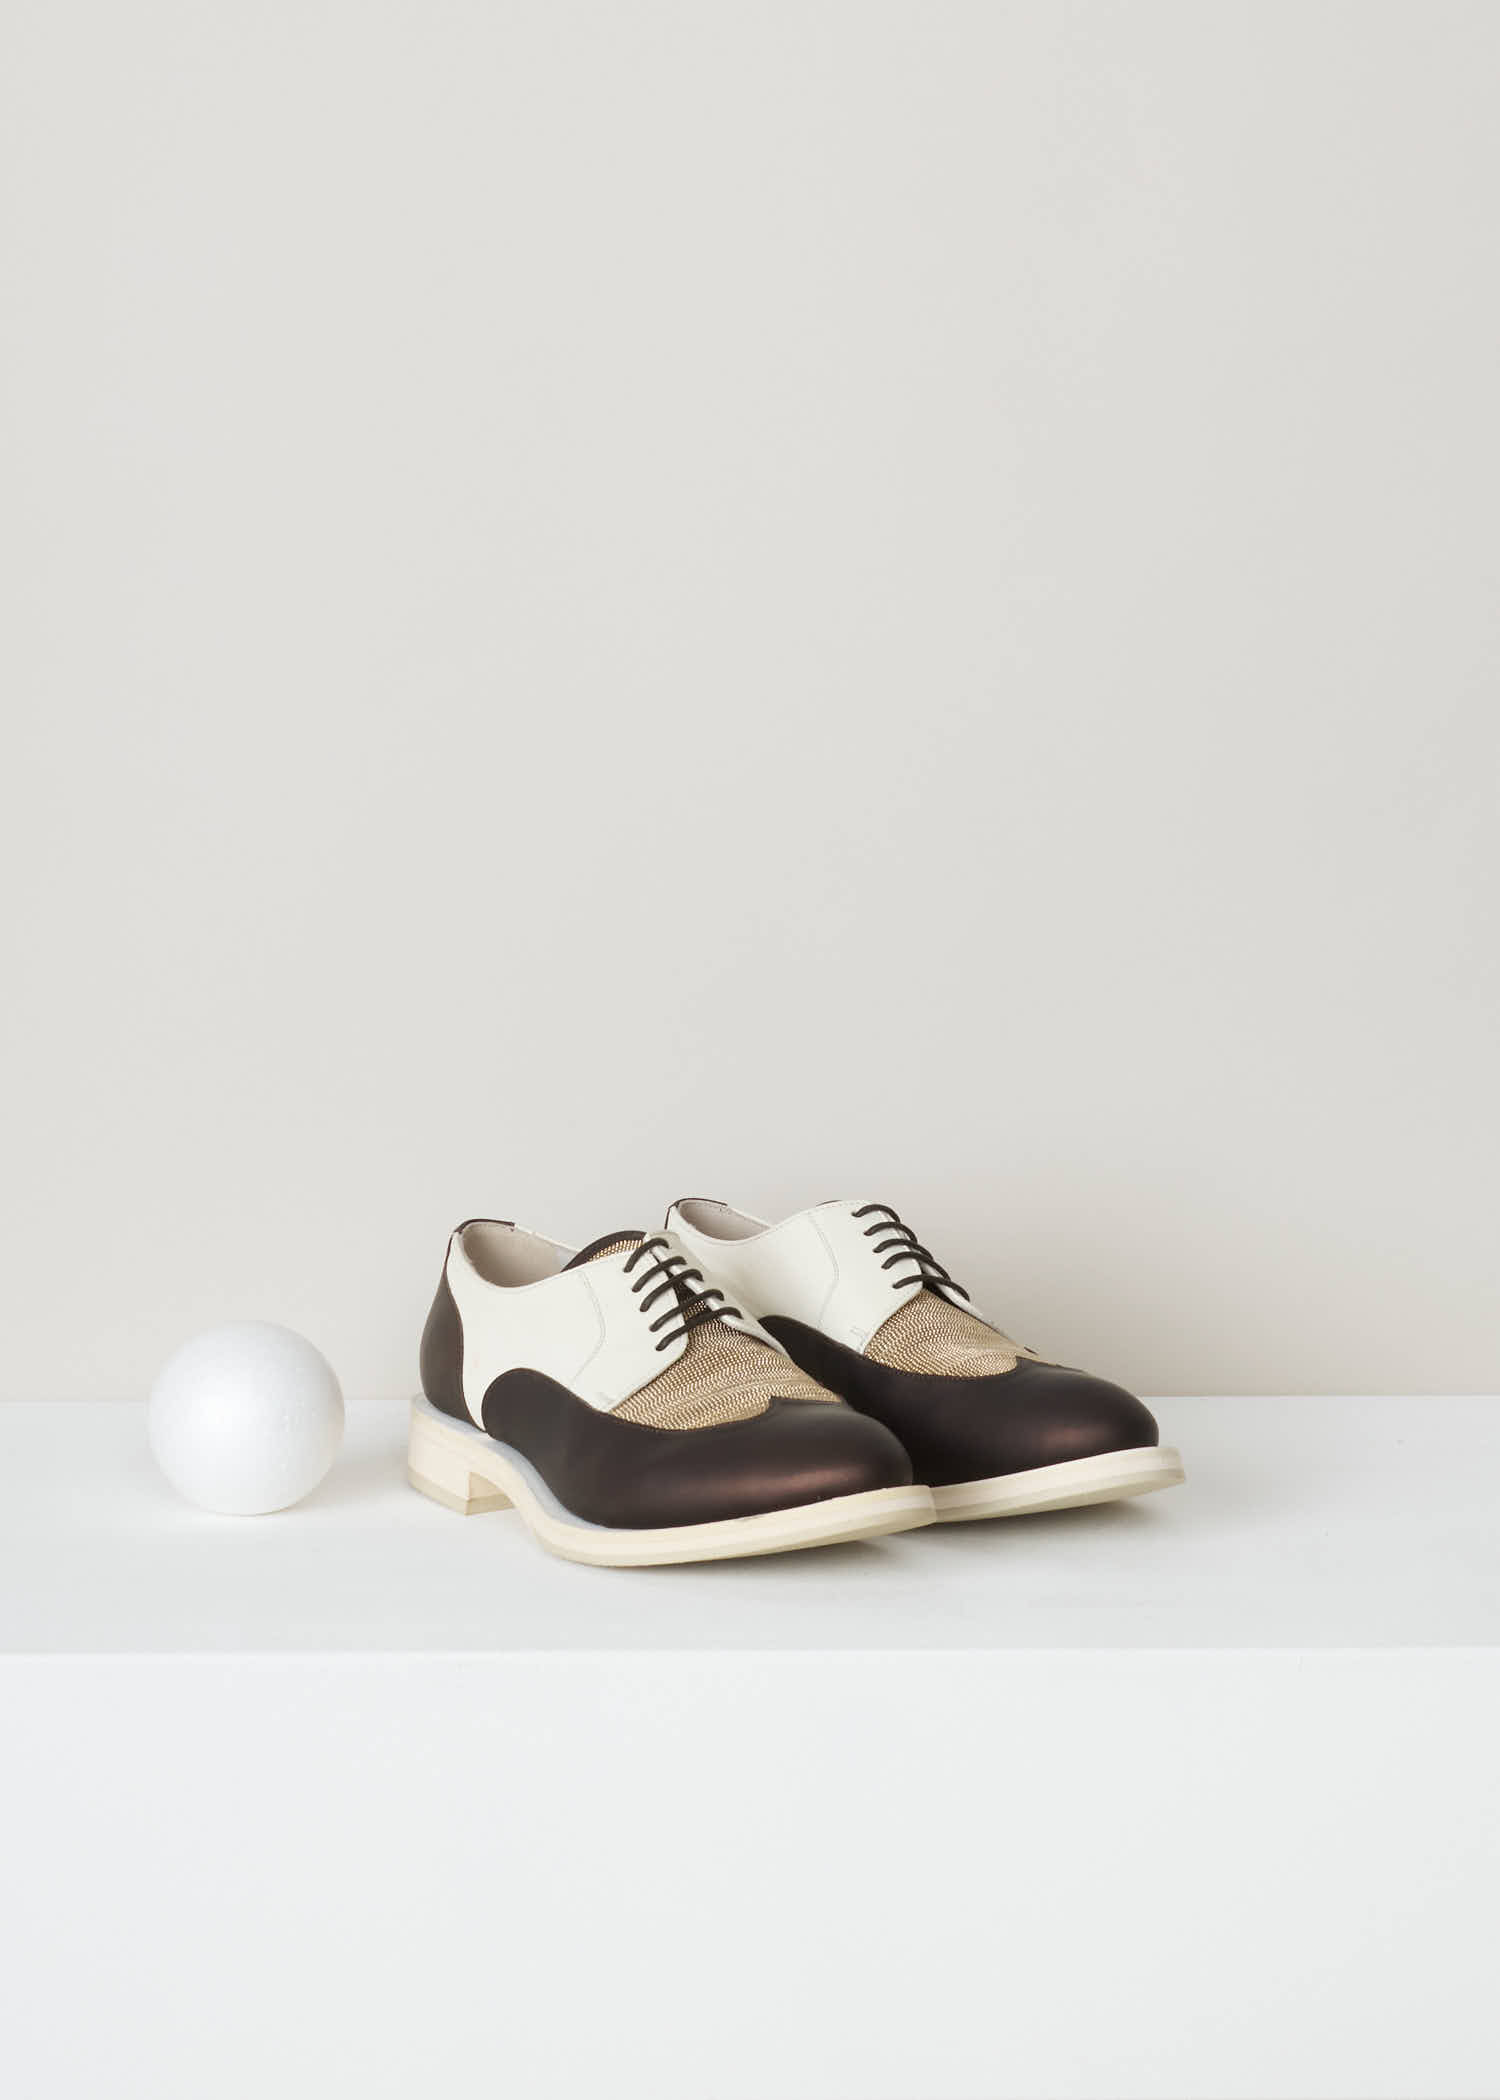 Brunello Cucinelli Leather lace-up shoes MZDRDG402_CC958 brown front. White and metallic brown leather derby shoe, with ultra-lightweight rubber sole and gold decorative beading.